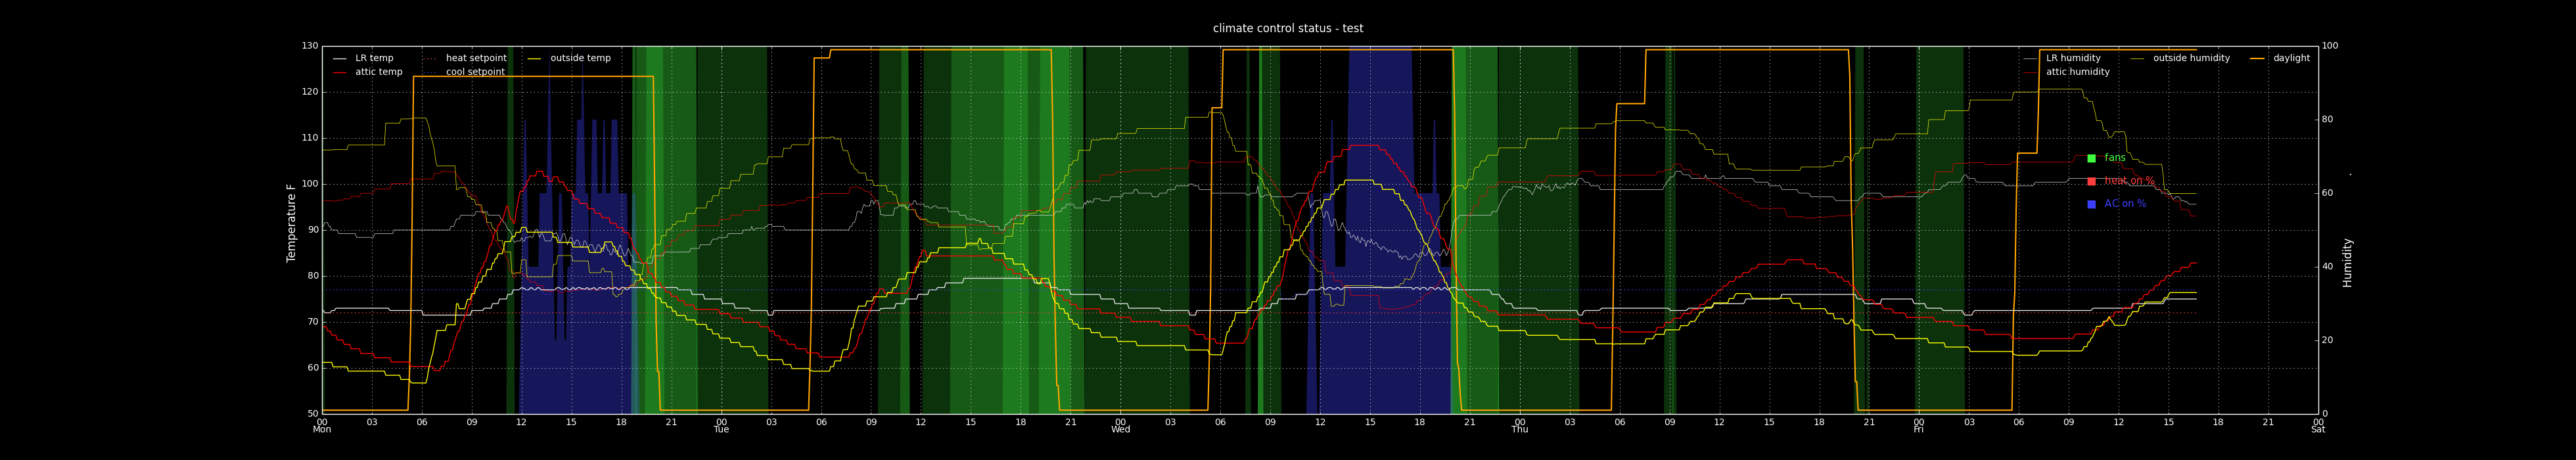 climate control plot - test-minute-S2.png